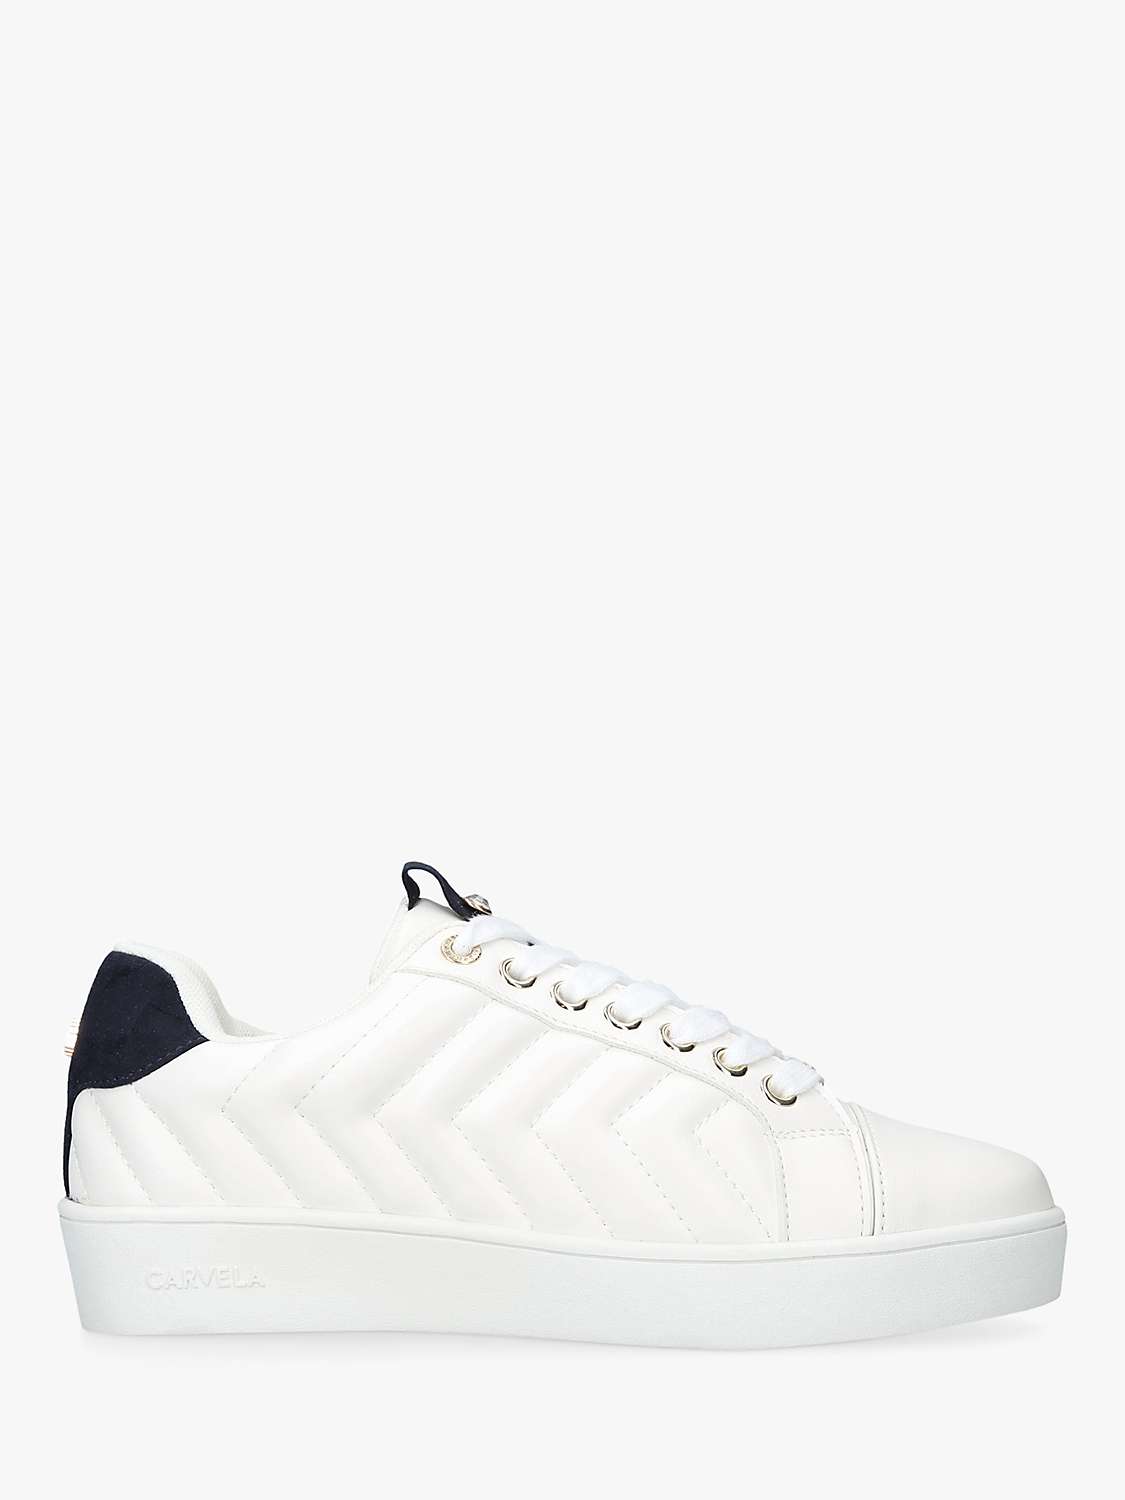 Buy Carvela Joyful Quilted Trainers, White Online at johnlewis.com